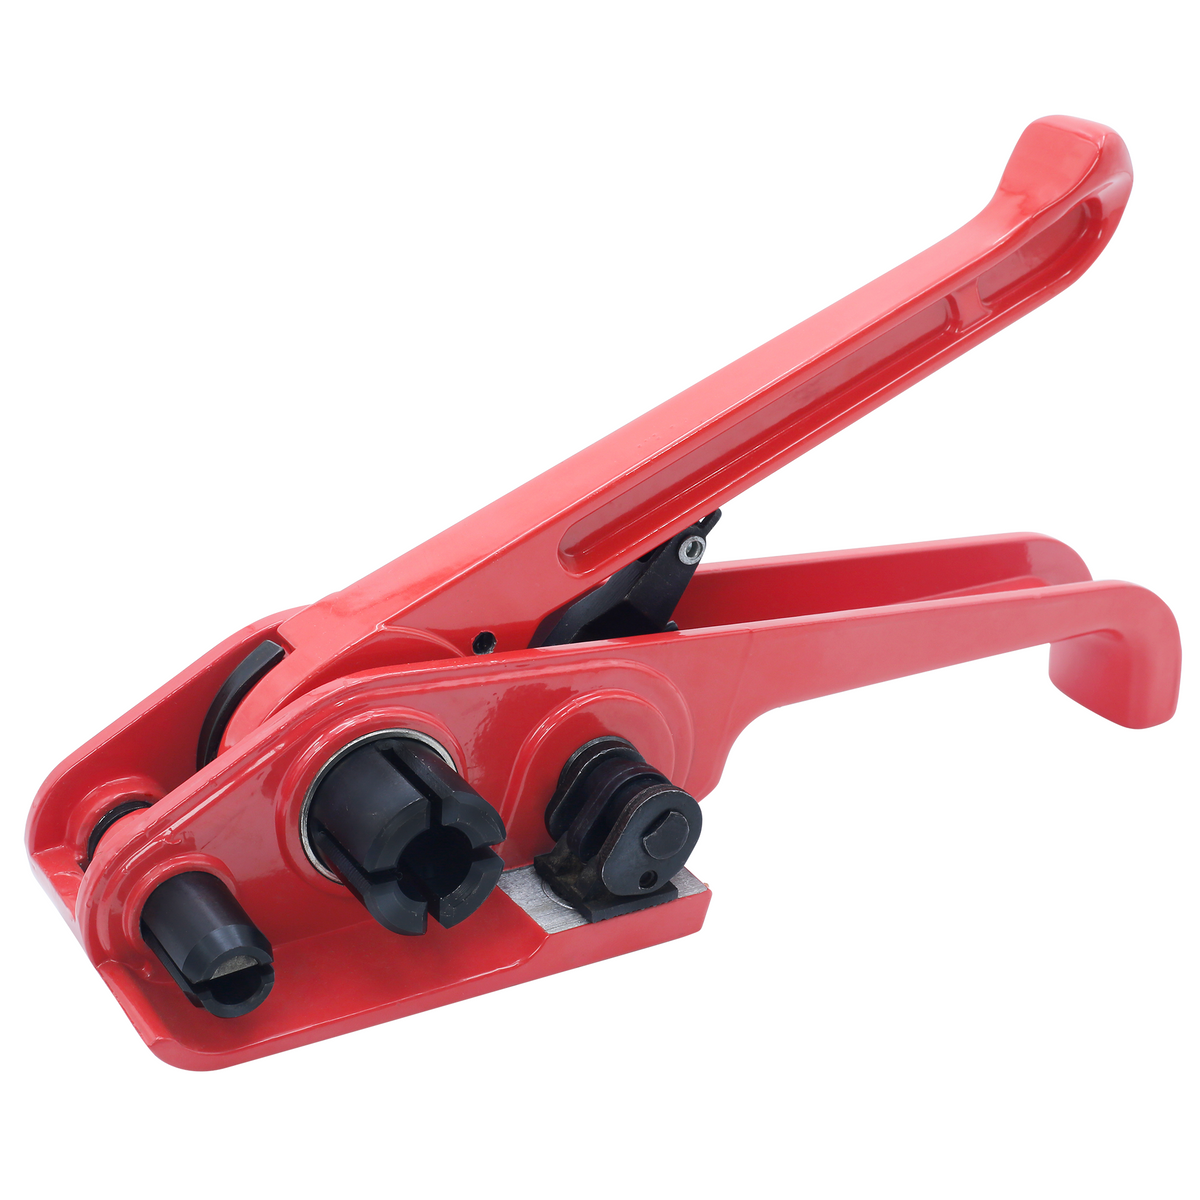 Manual Strapping Tensioning and Cutting Tool for Plastic Straps by JORES Technologies